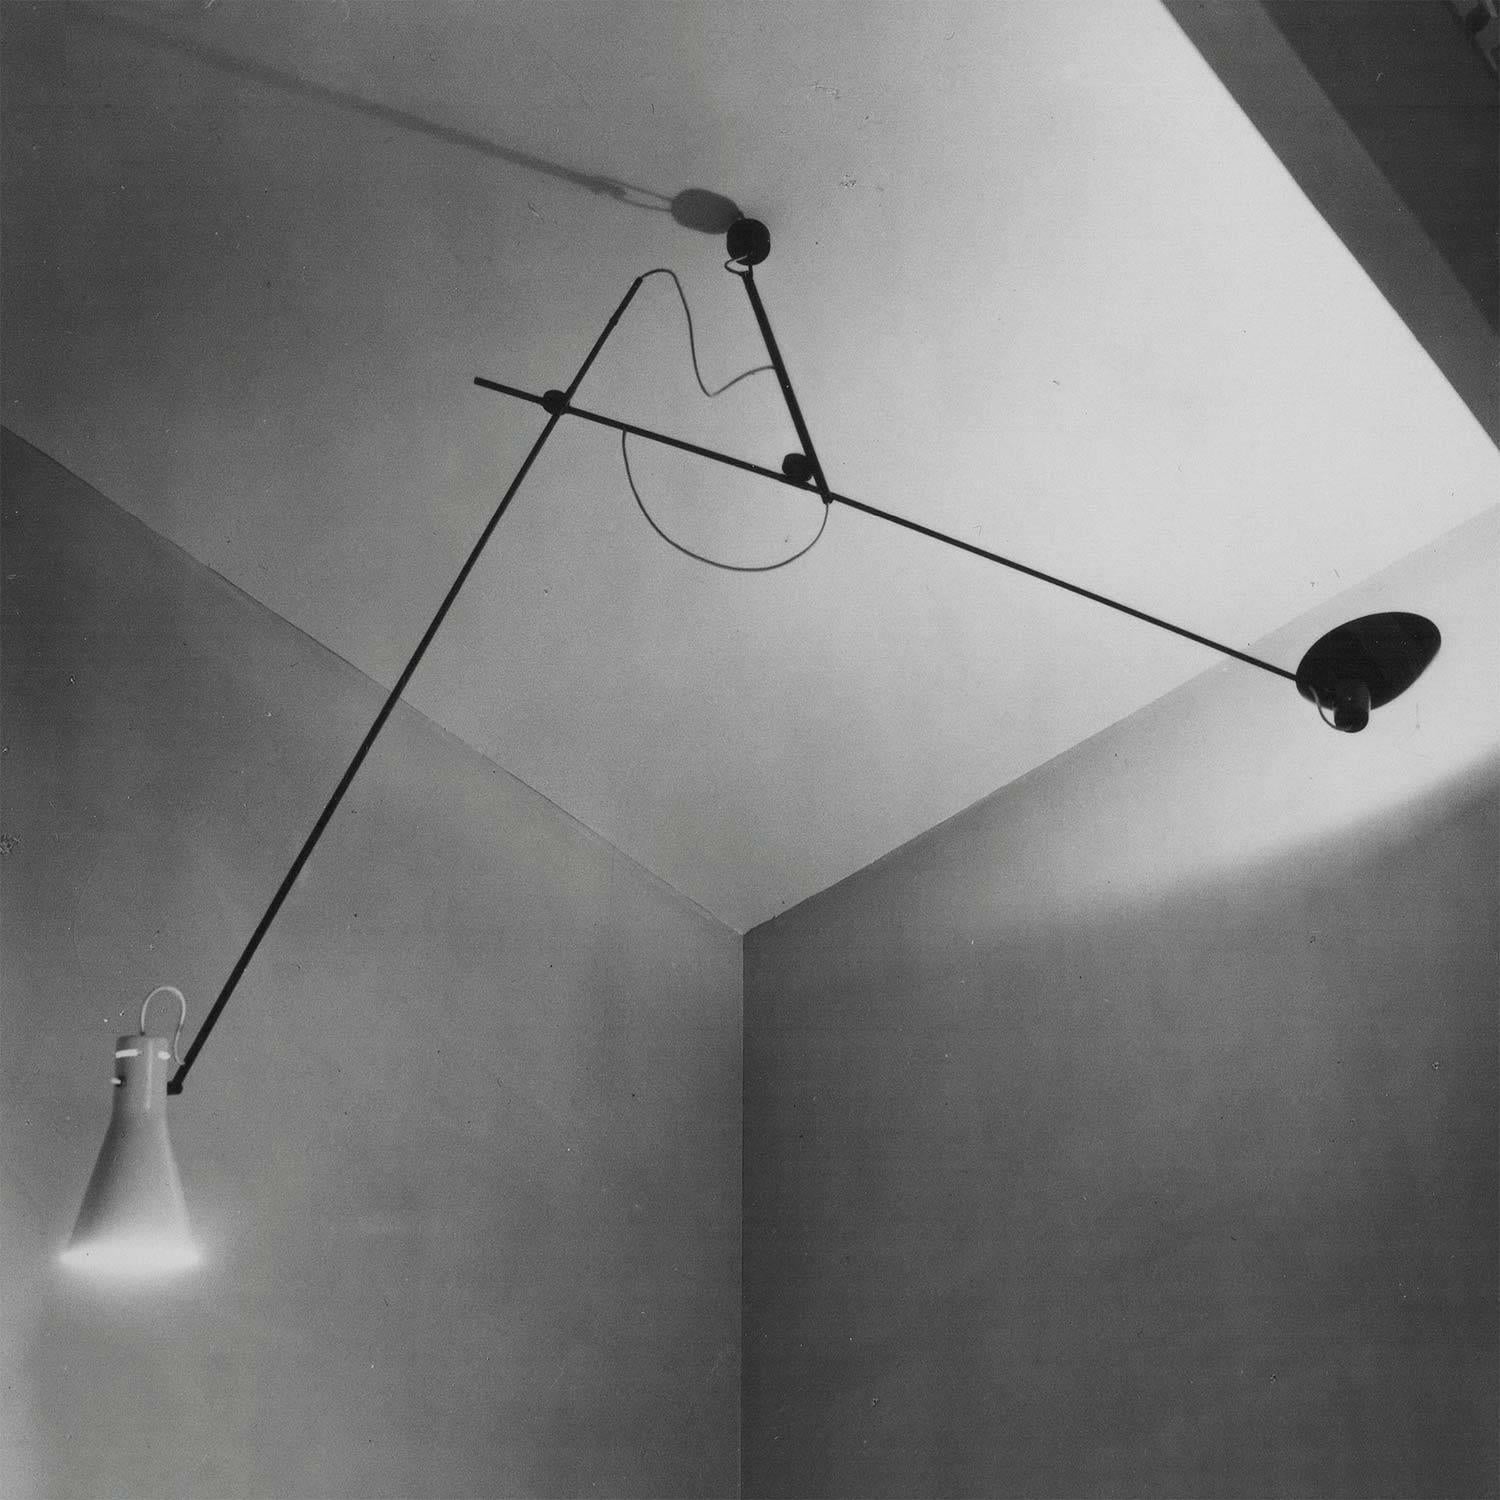 Vittoriano Viganò 'VV Suspension' lamp in black and brass for Astep. 

Viganò was the art director of Arteluce, the company founded by his creative partner Gino Sarfatti, and the visor was one of his most celebrated design series. Designed in 1951